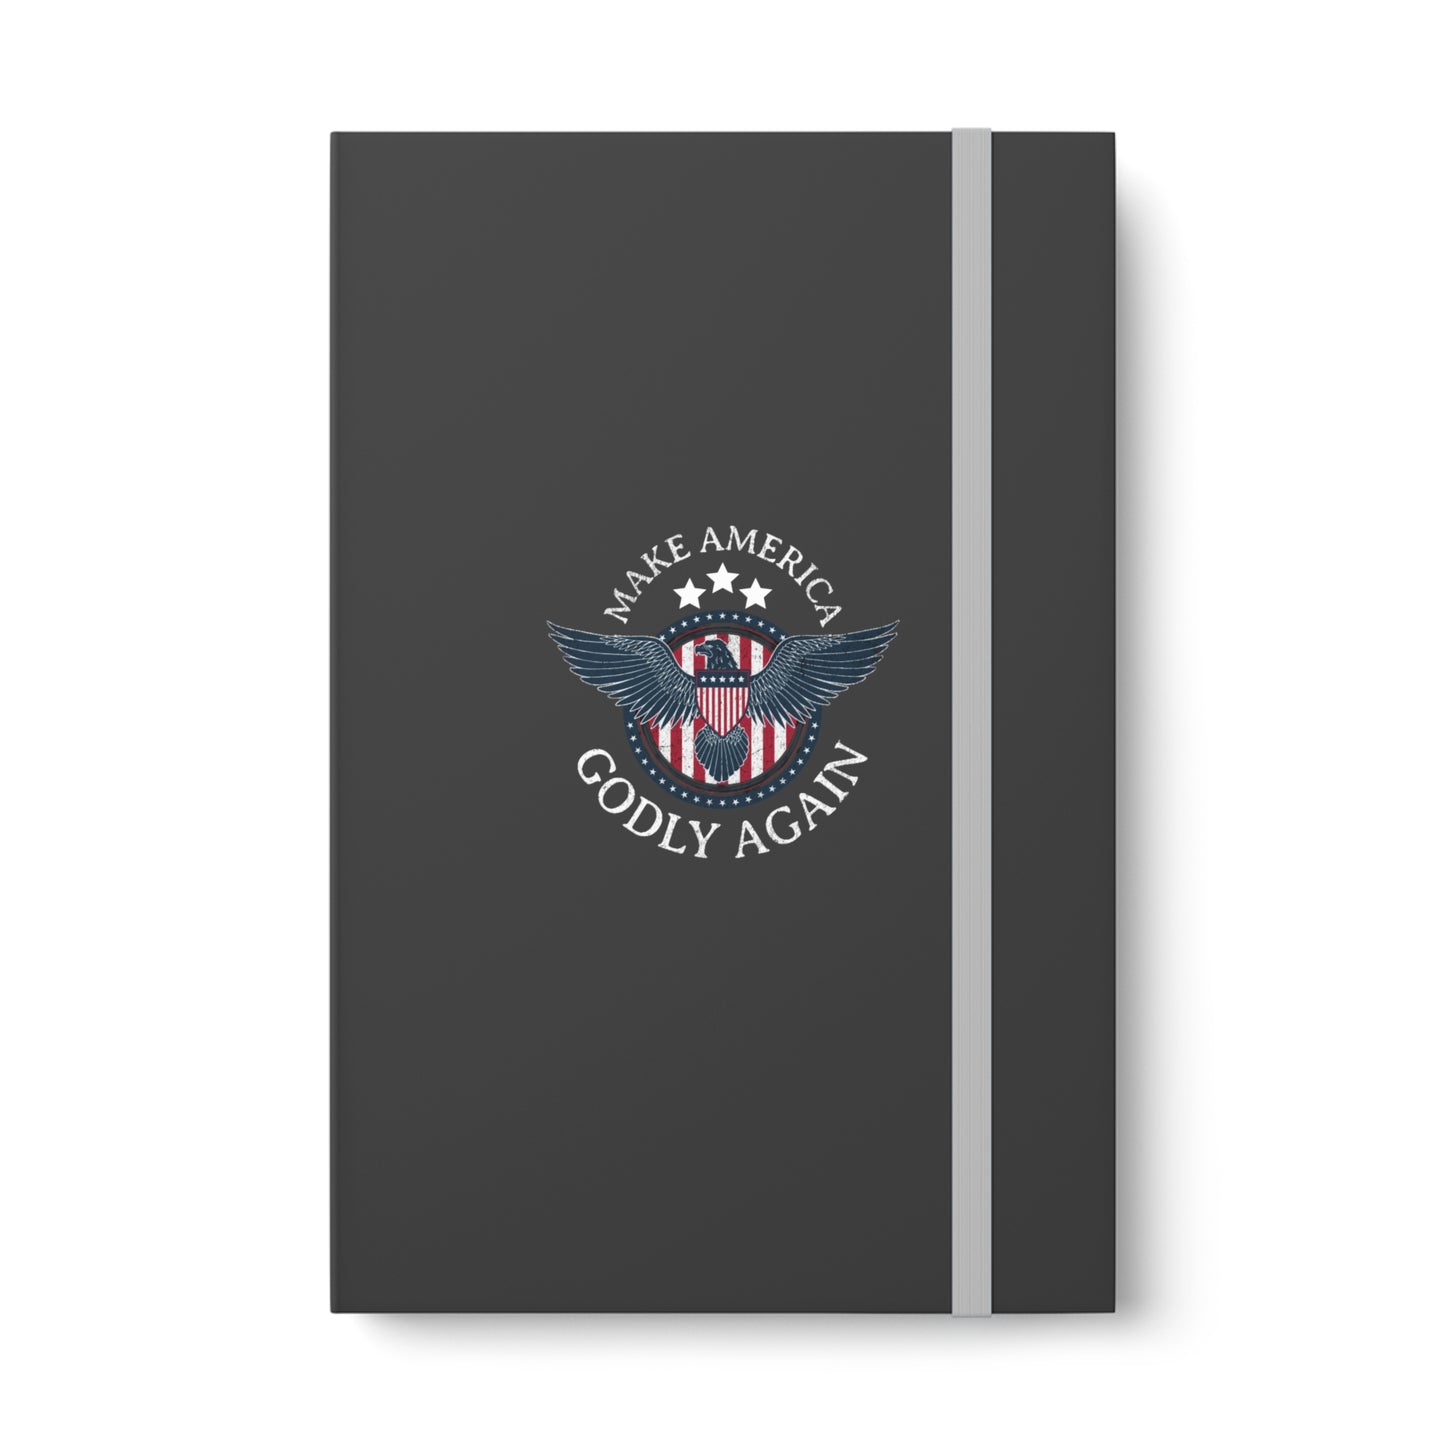 Make America Godly Again - Color Contrast Notebook Journal